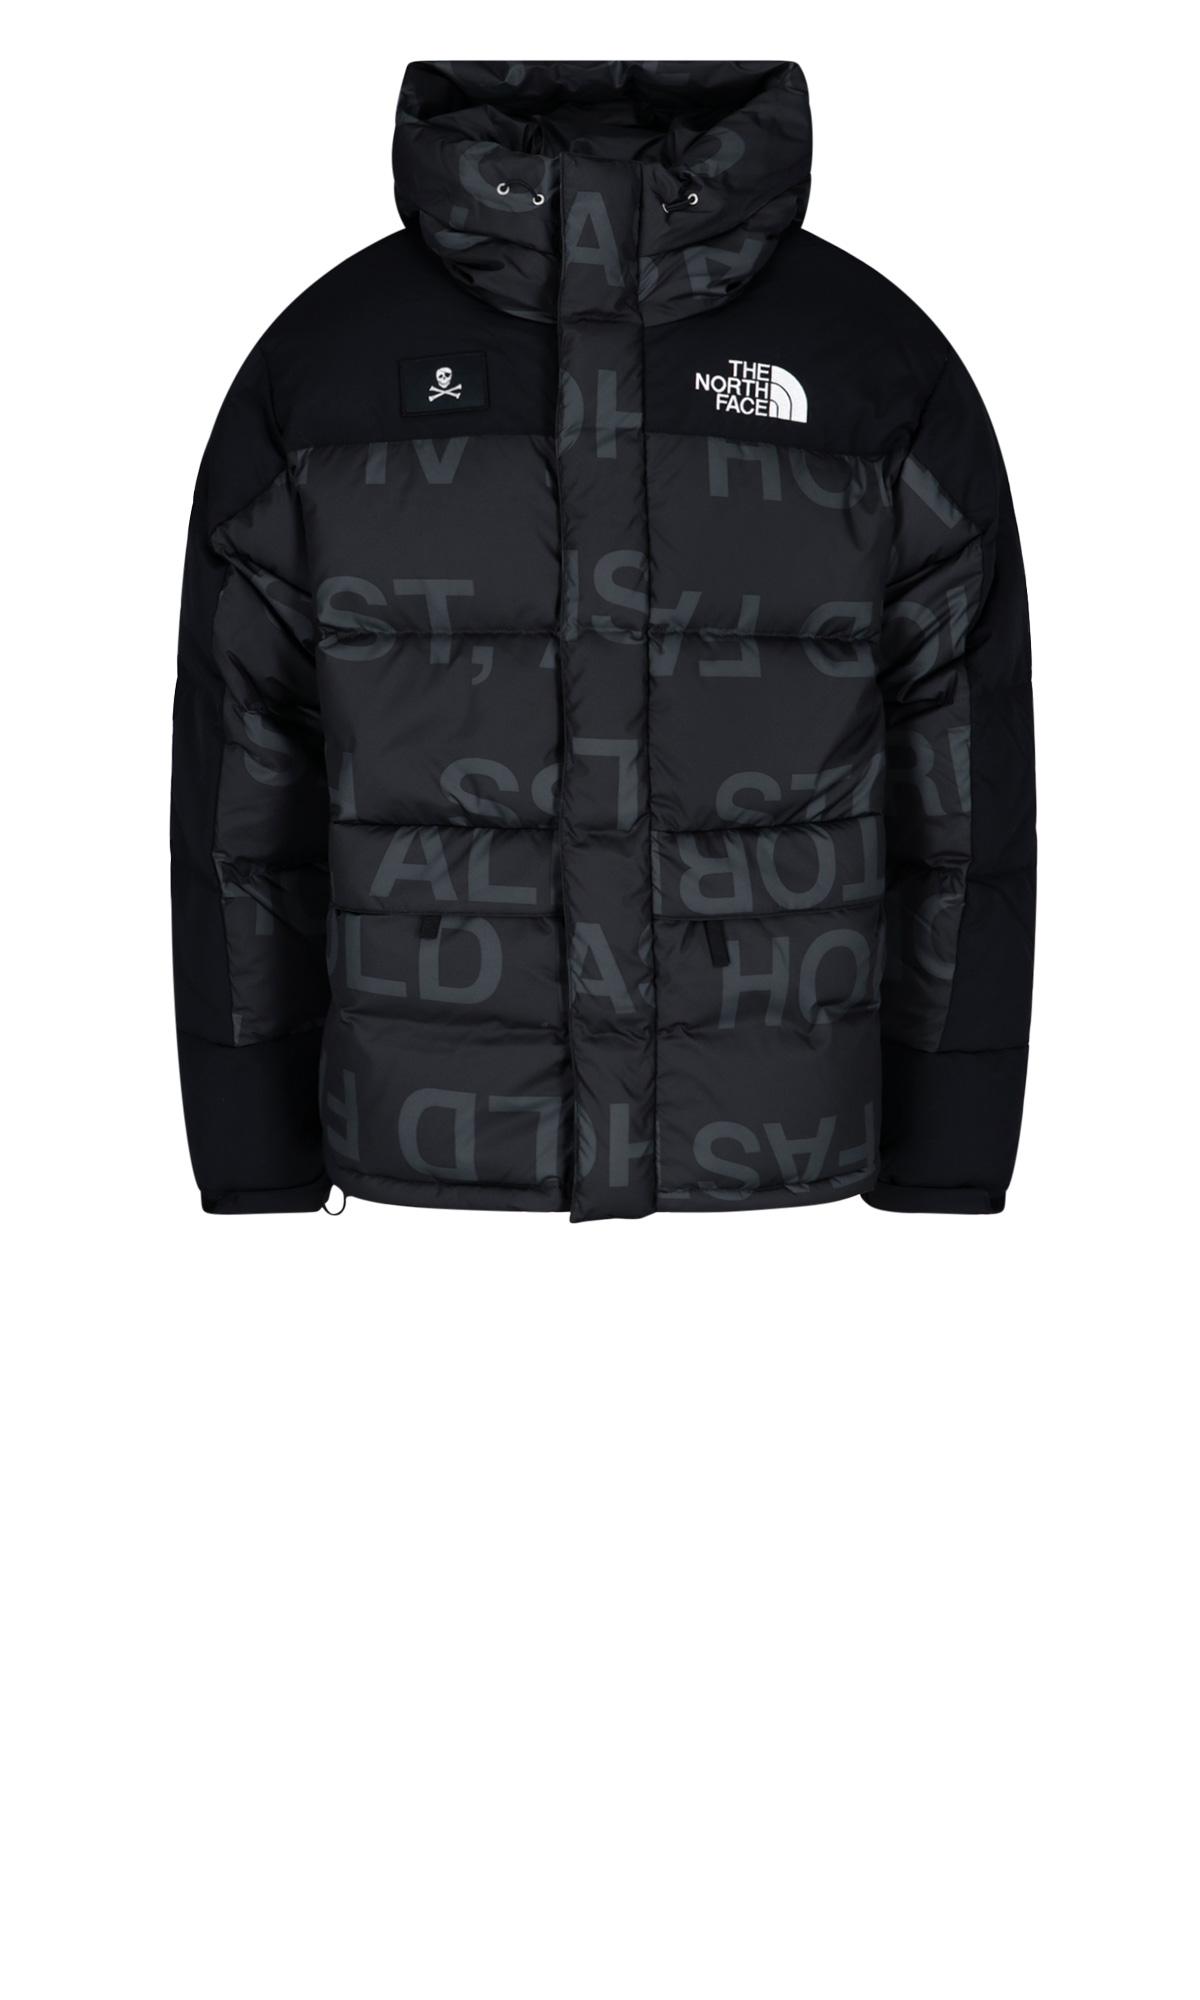 The North Face 'conrad Anker Flag Himalayan Down' Jacket in Nero 